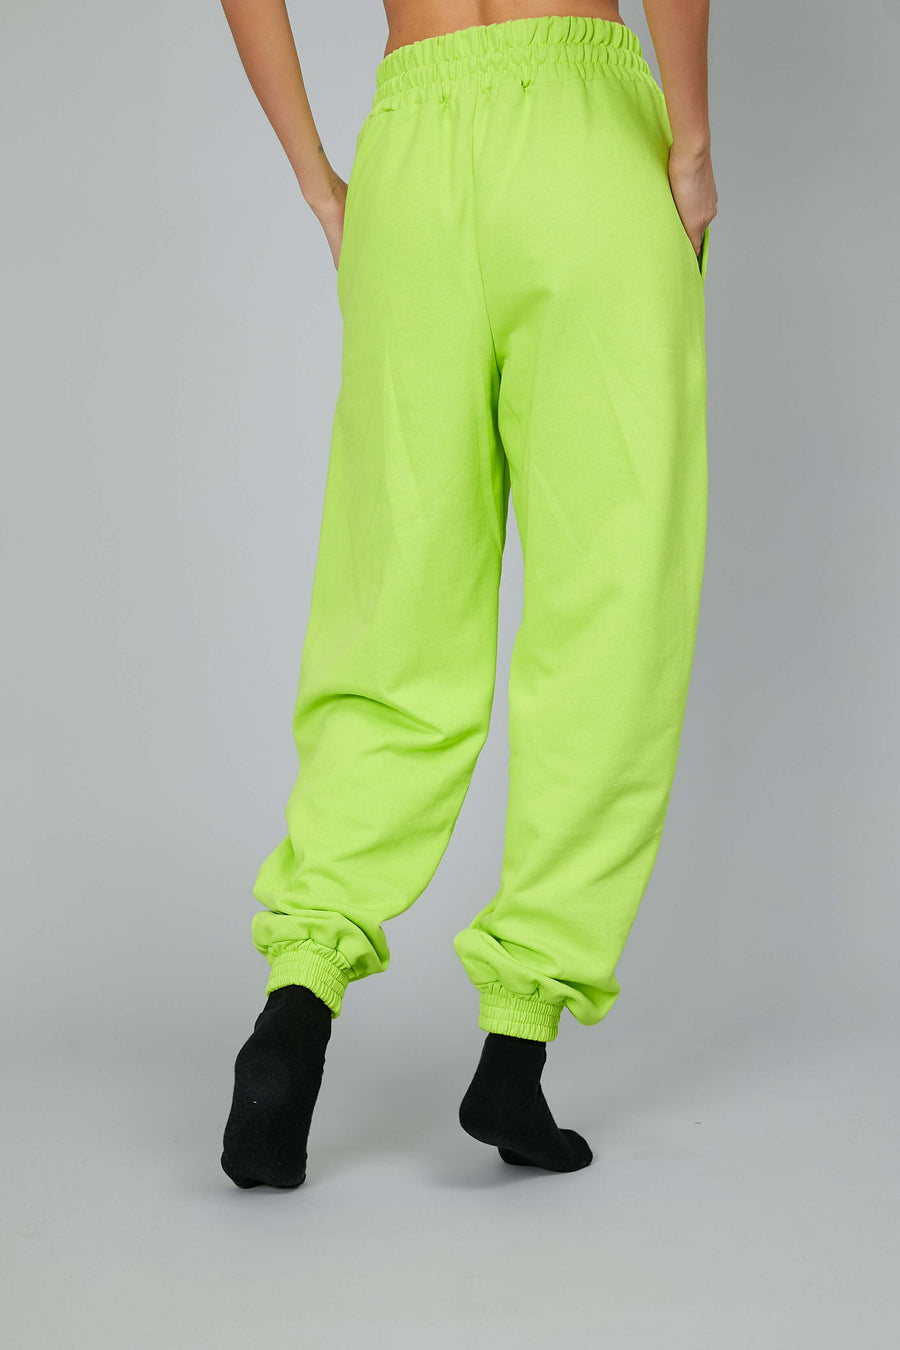 PITTBULL LIME TROUSERS